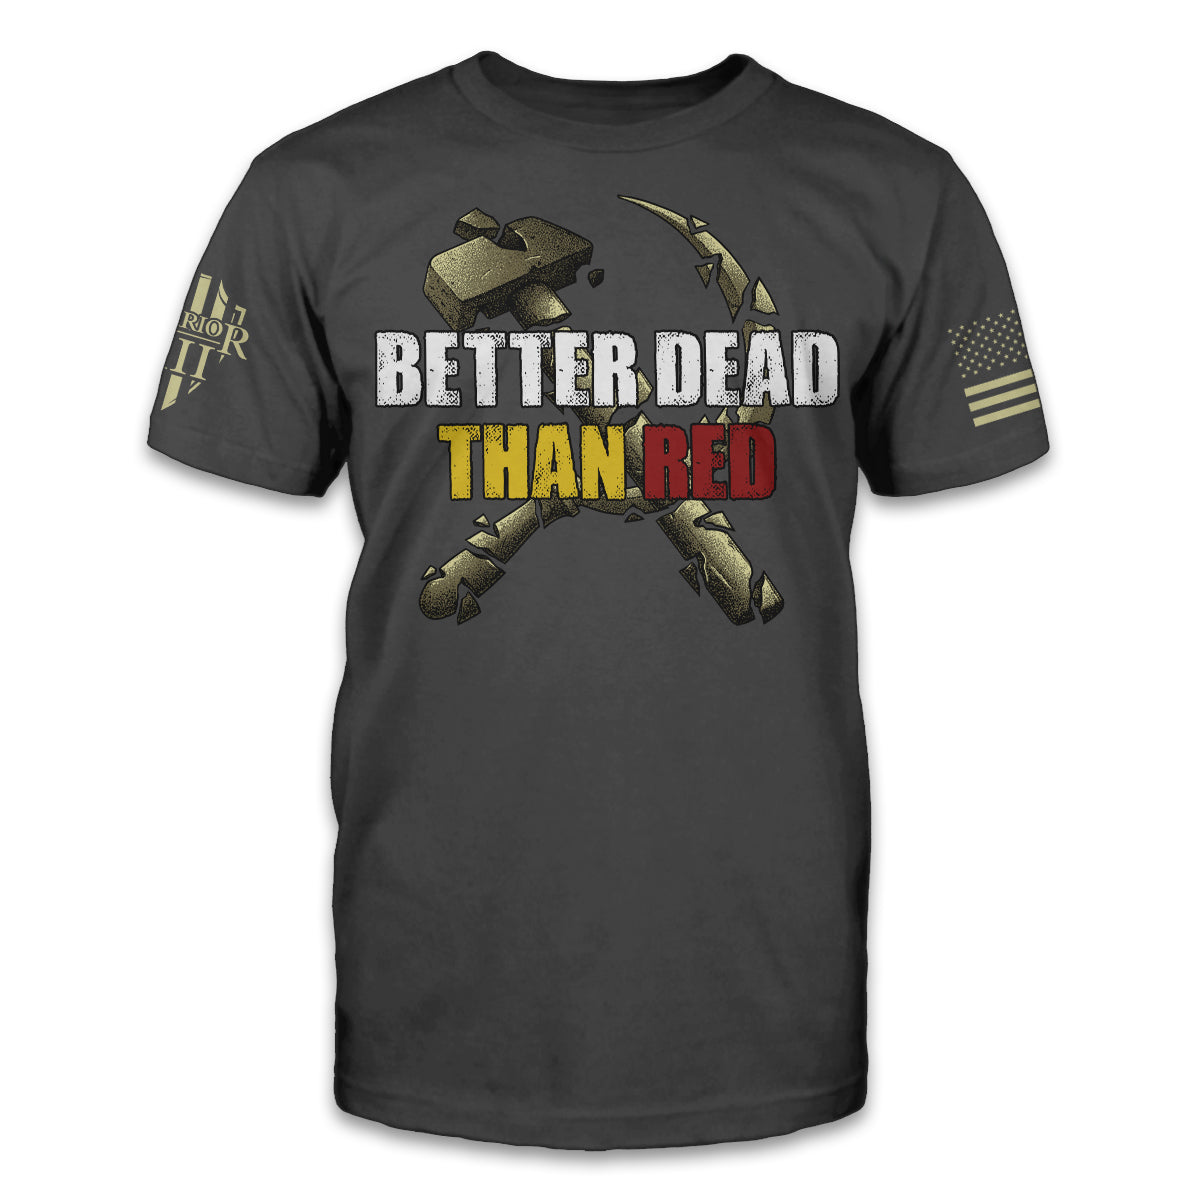 A grey t-shirt with the words "Better dead than red" printed on the front.